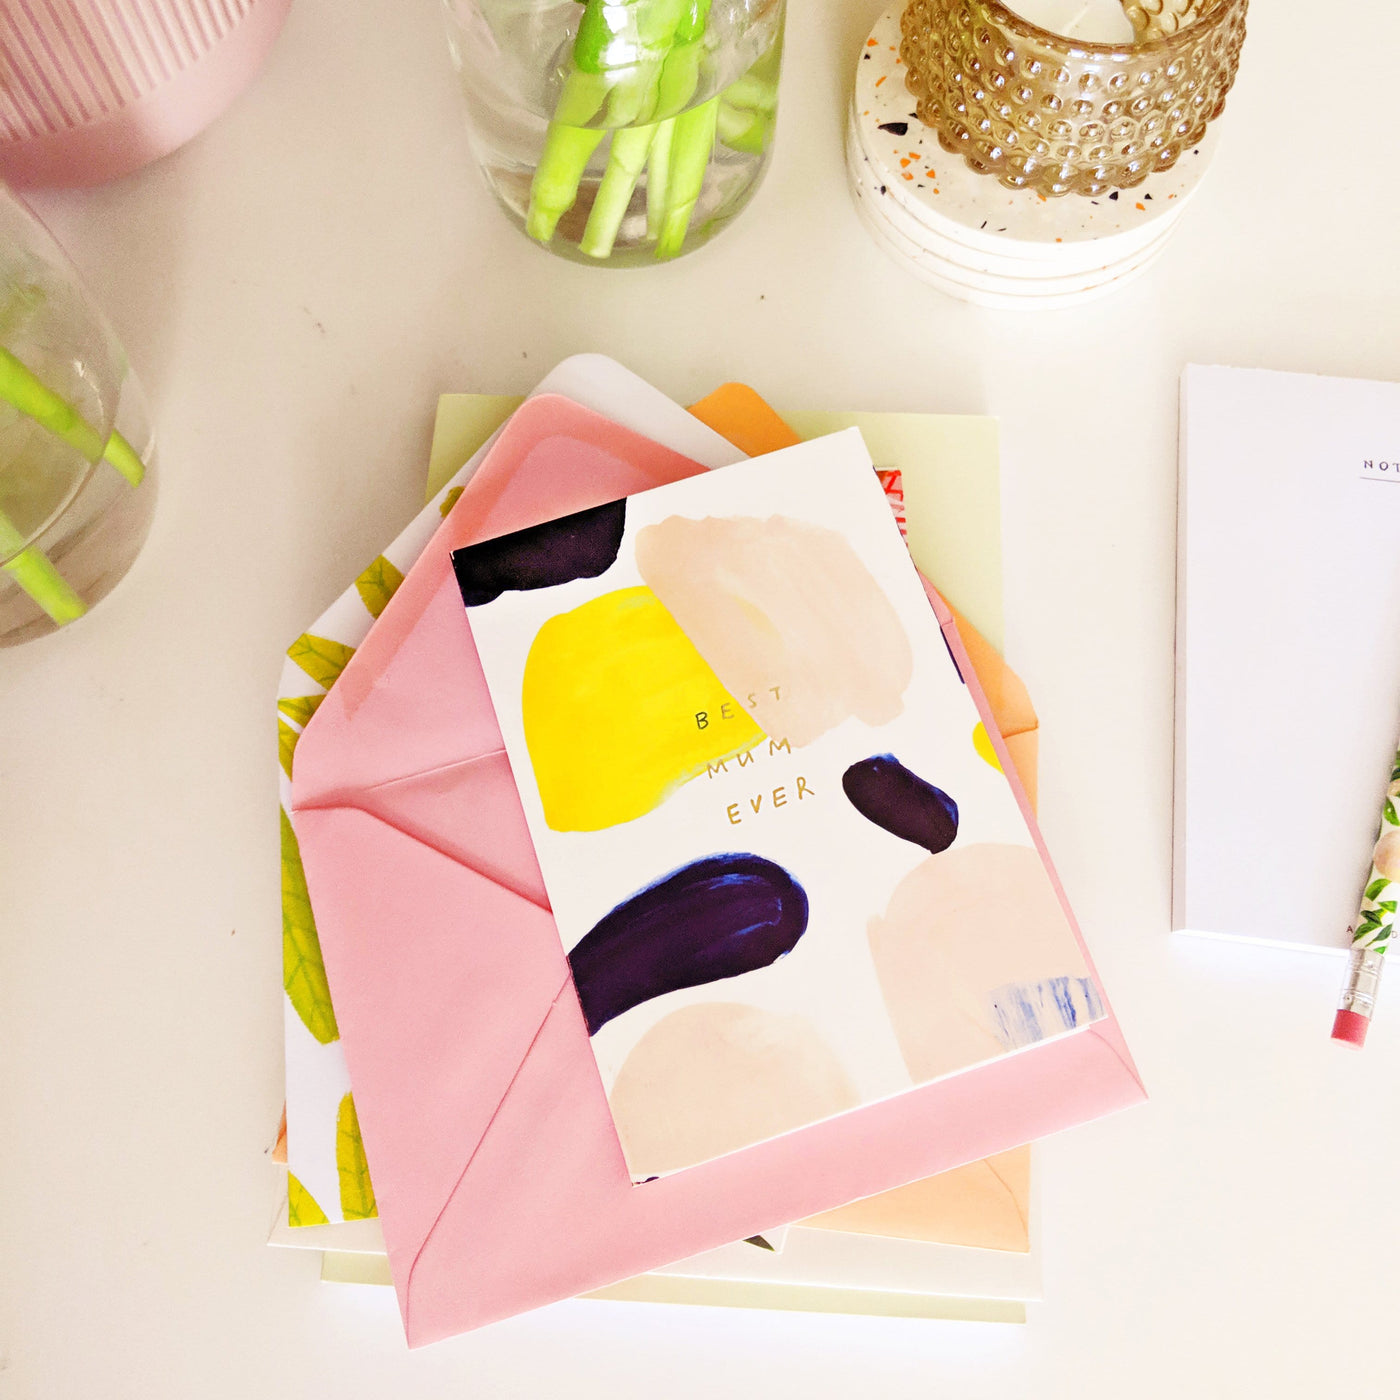 Paint Swatches In Pink Black And Yellow In An Abstract Design A6 White Card Coupled With Pink Envelope Reading Best Mum Ever - Annie Dornan Smith